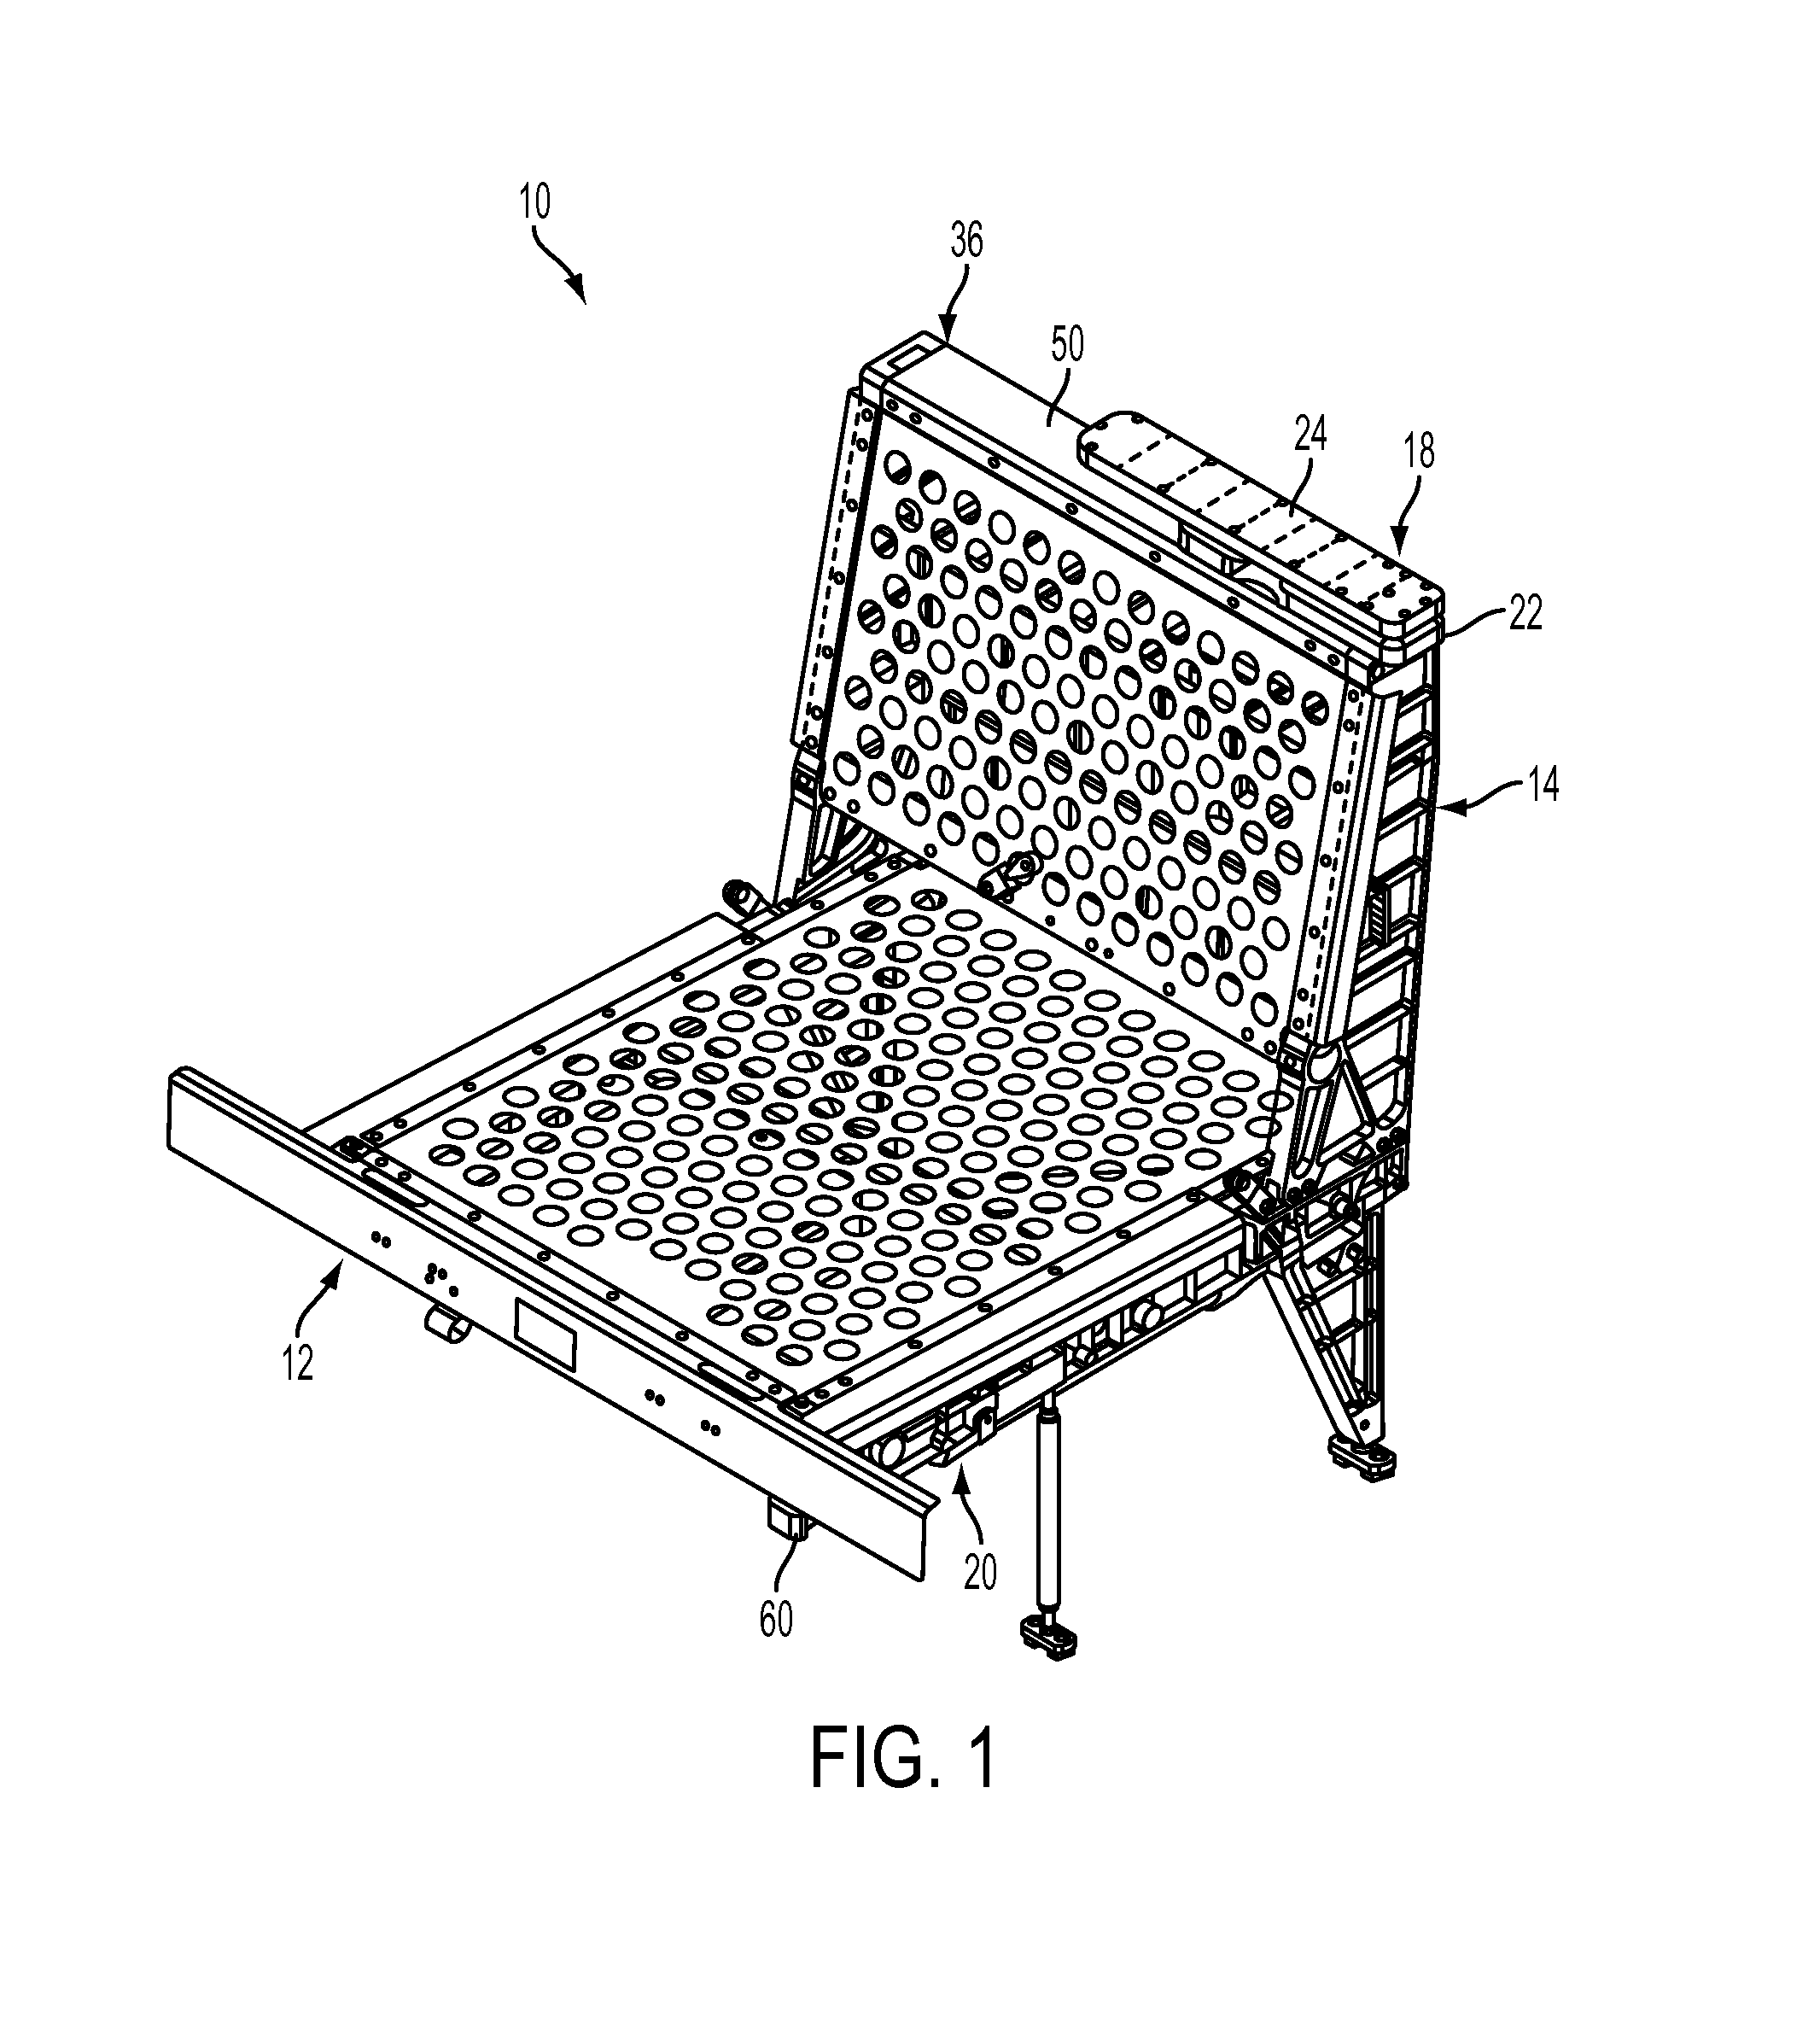 Passive occupant restraint for side-facing aircraft seats